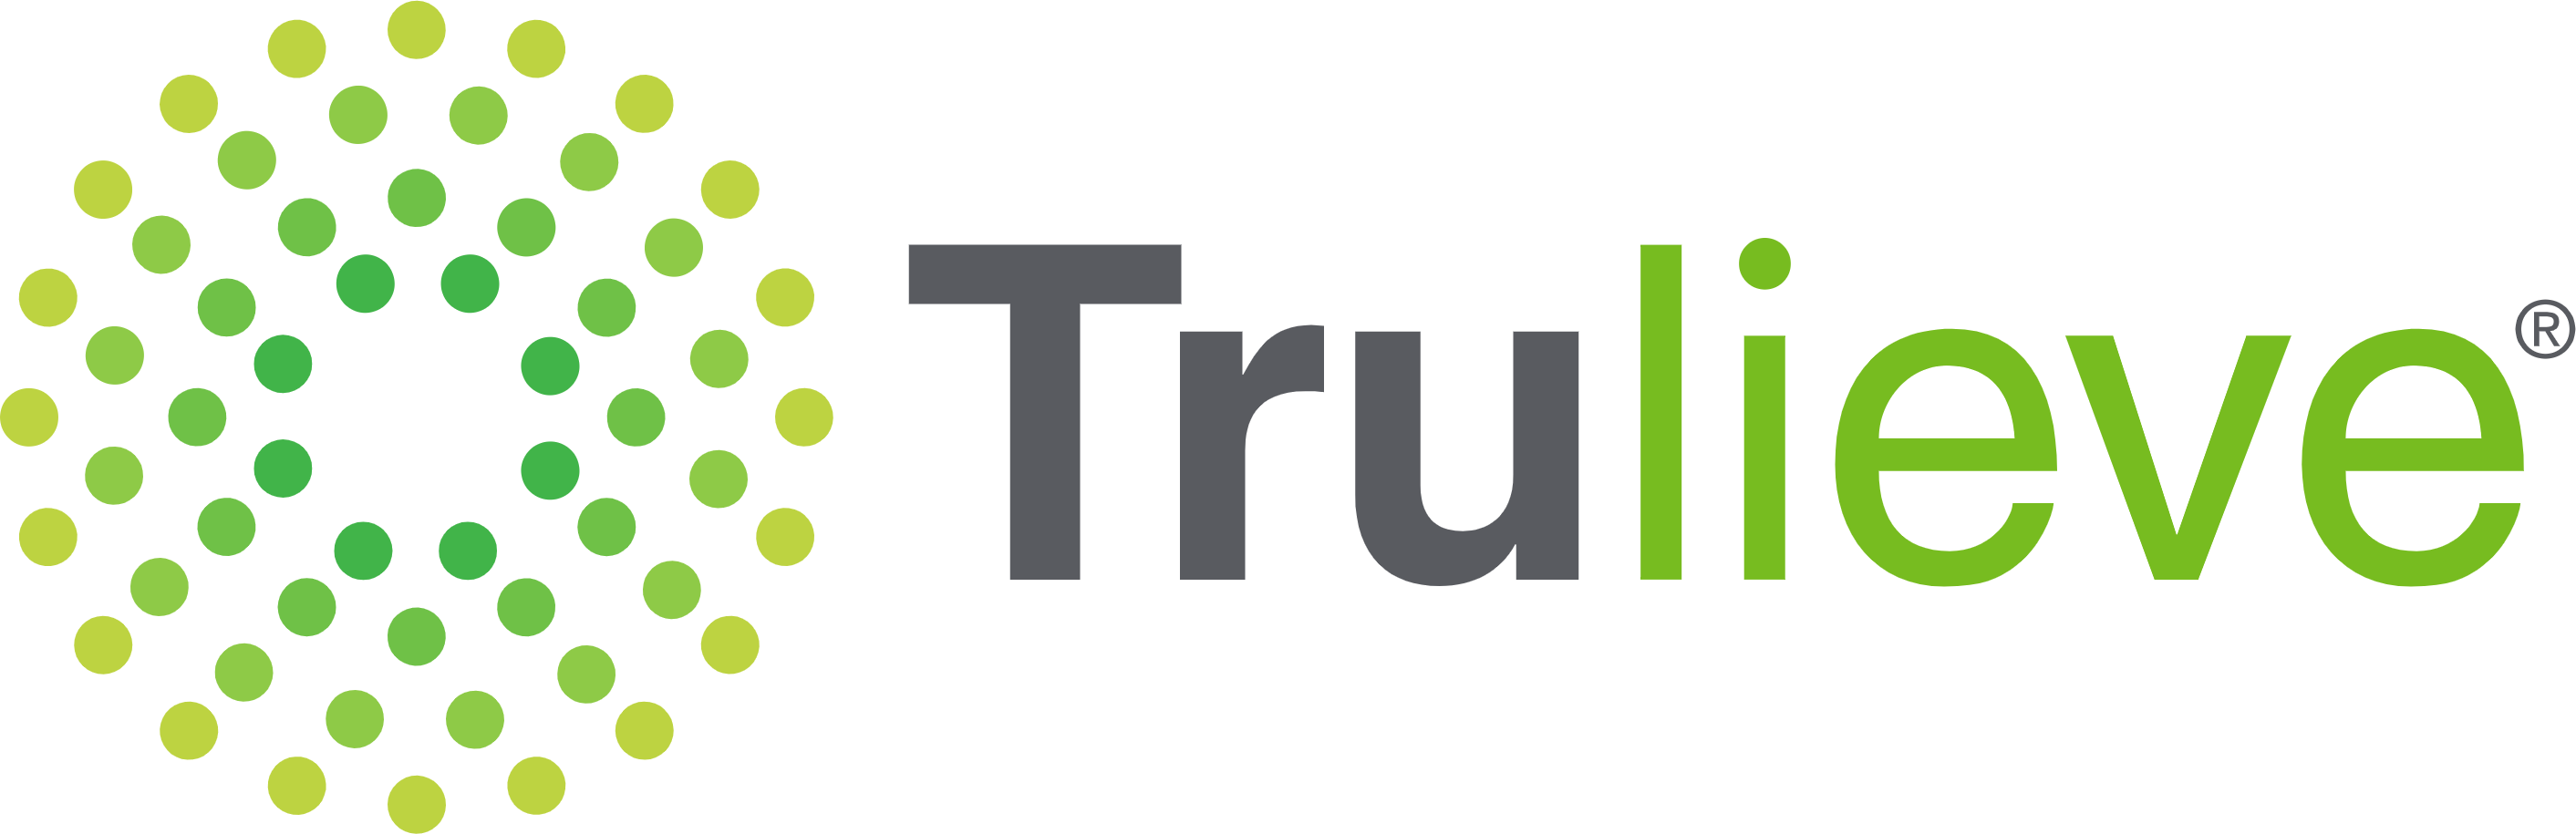 Trulieve Cannabis
 logo large (transparent PNG)